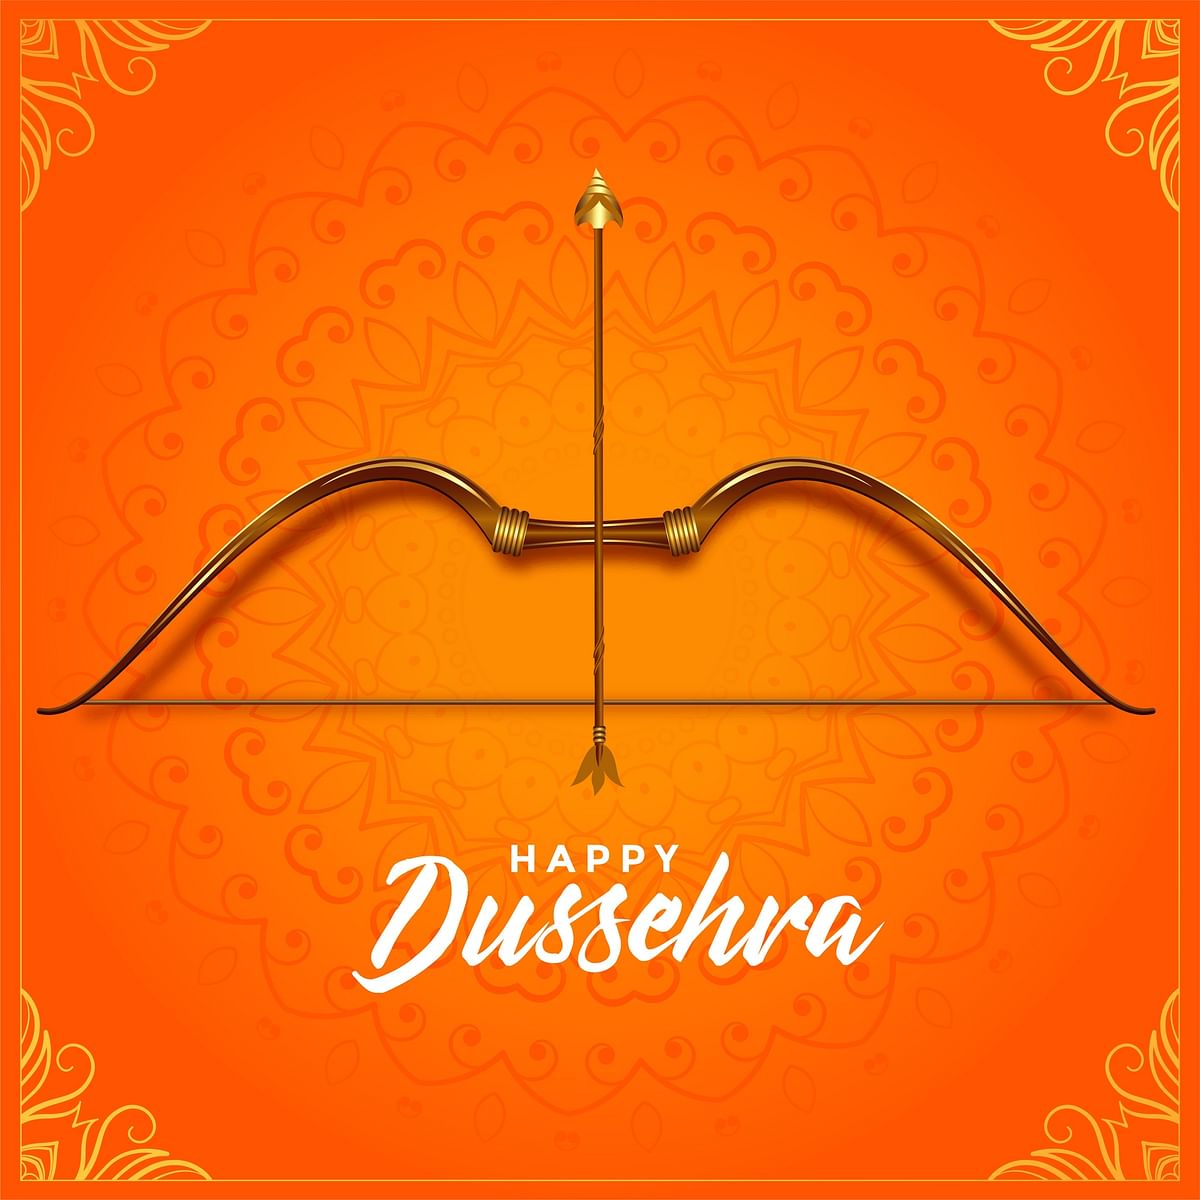 Dussehra 2020 Wishes, Quotes, Images and Greeting For Whatsapp message.